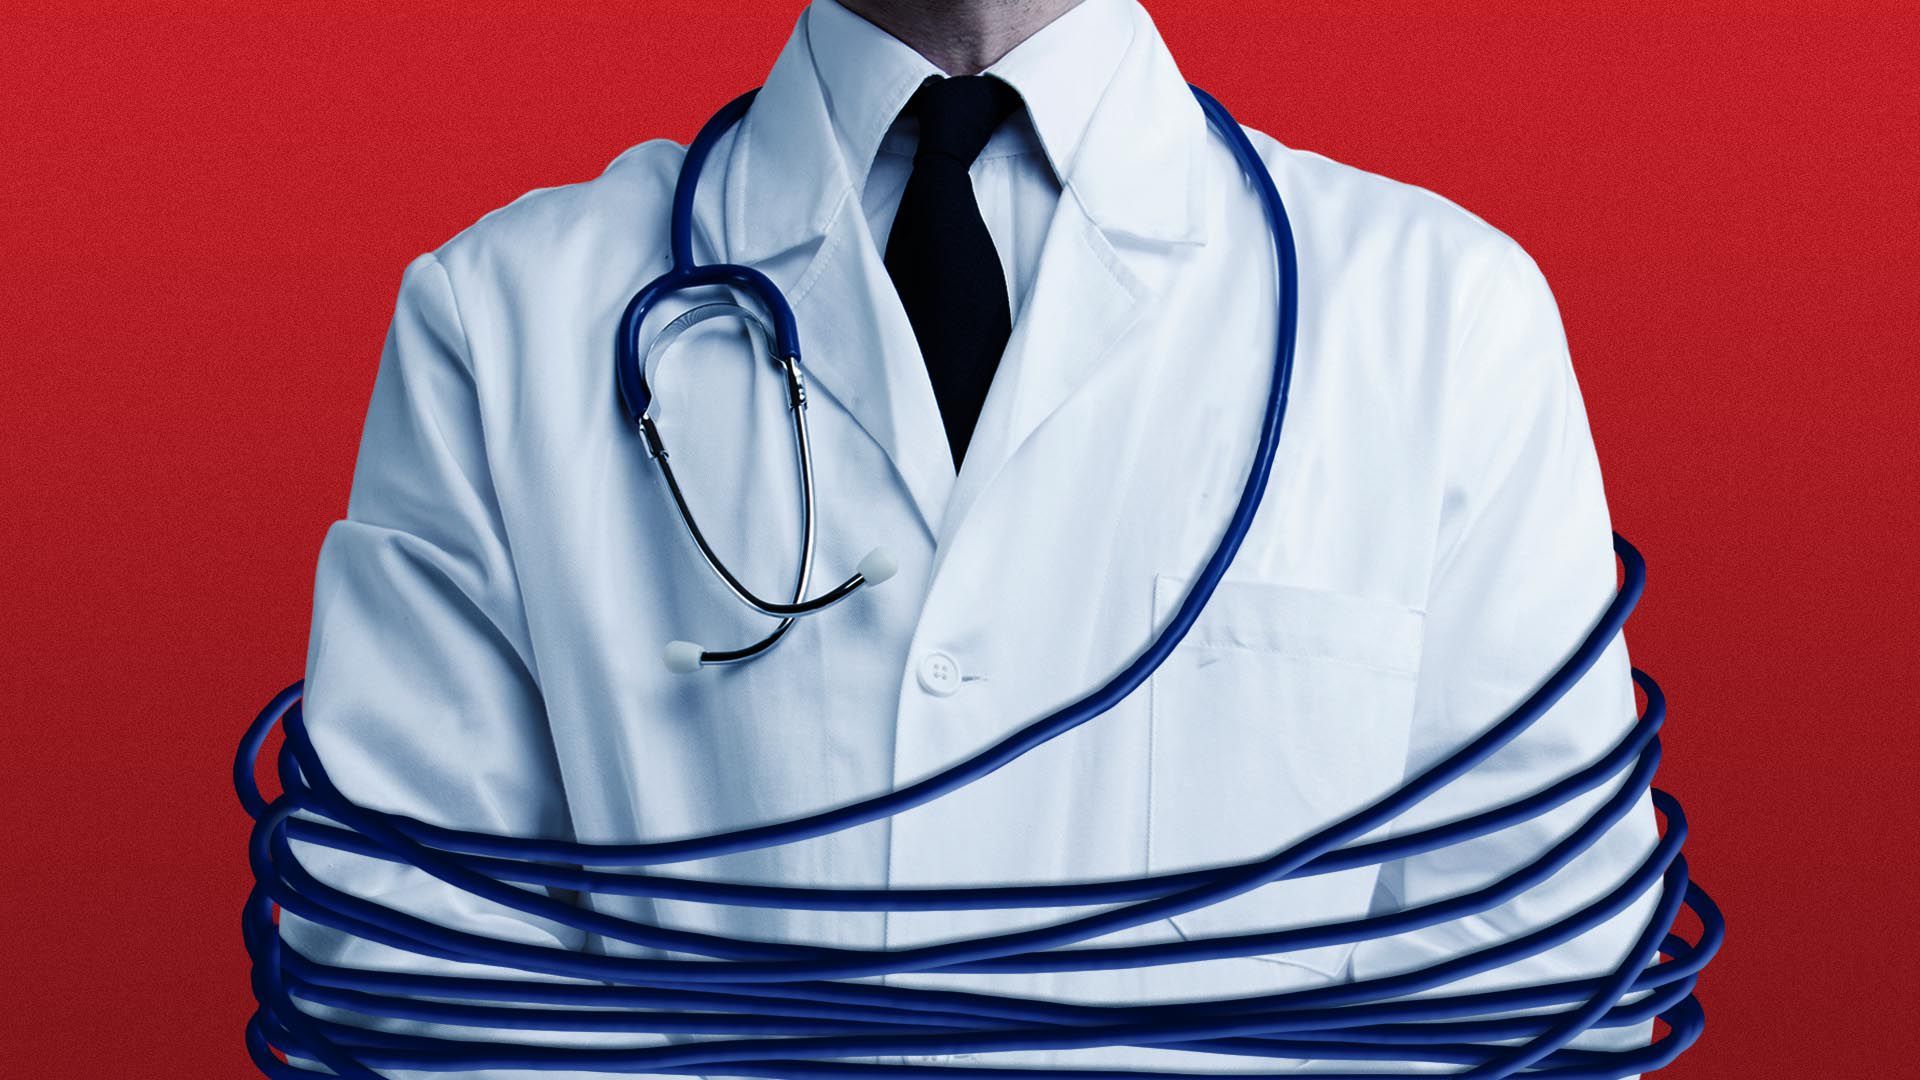 Illustration of a stethoscope wrapped around a doctor's torso.